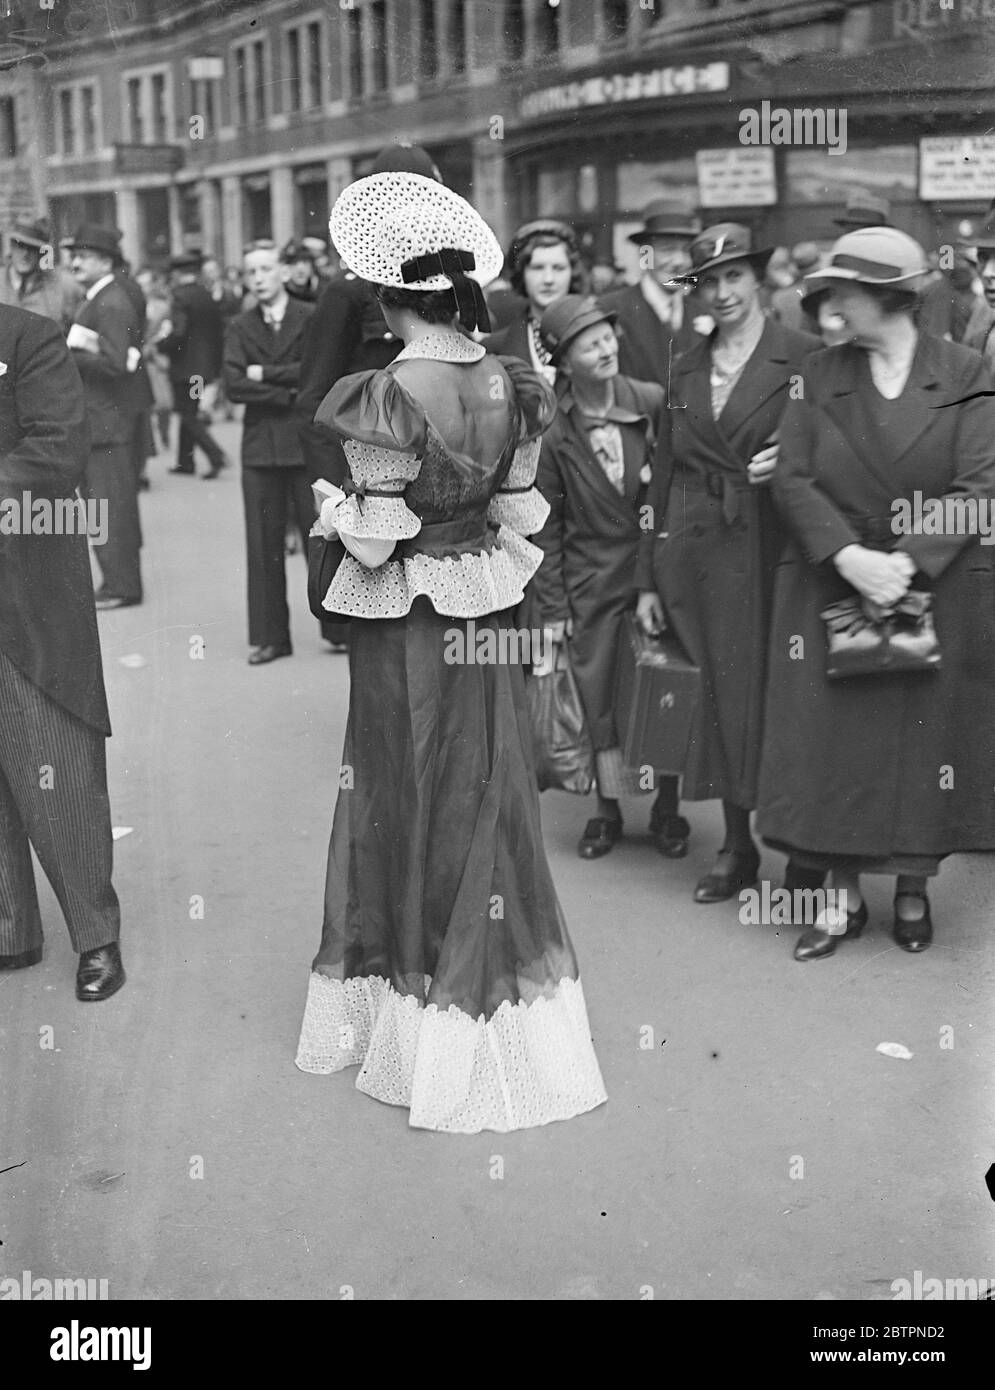 Lace and bareback for Ascot. A lace swotting up worn with a lace trimmed bareback frock by woman racegoer leaving Waterloo station for the opening day of ascot 15 June 1937 Stock Photo